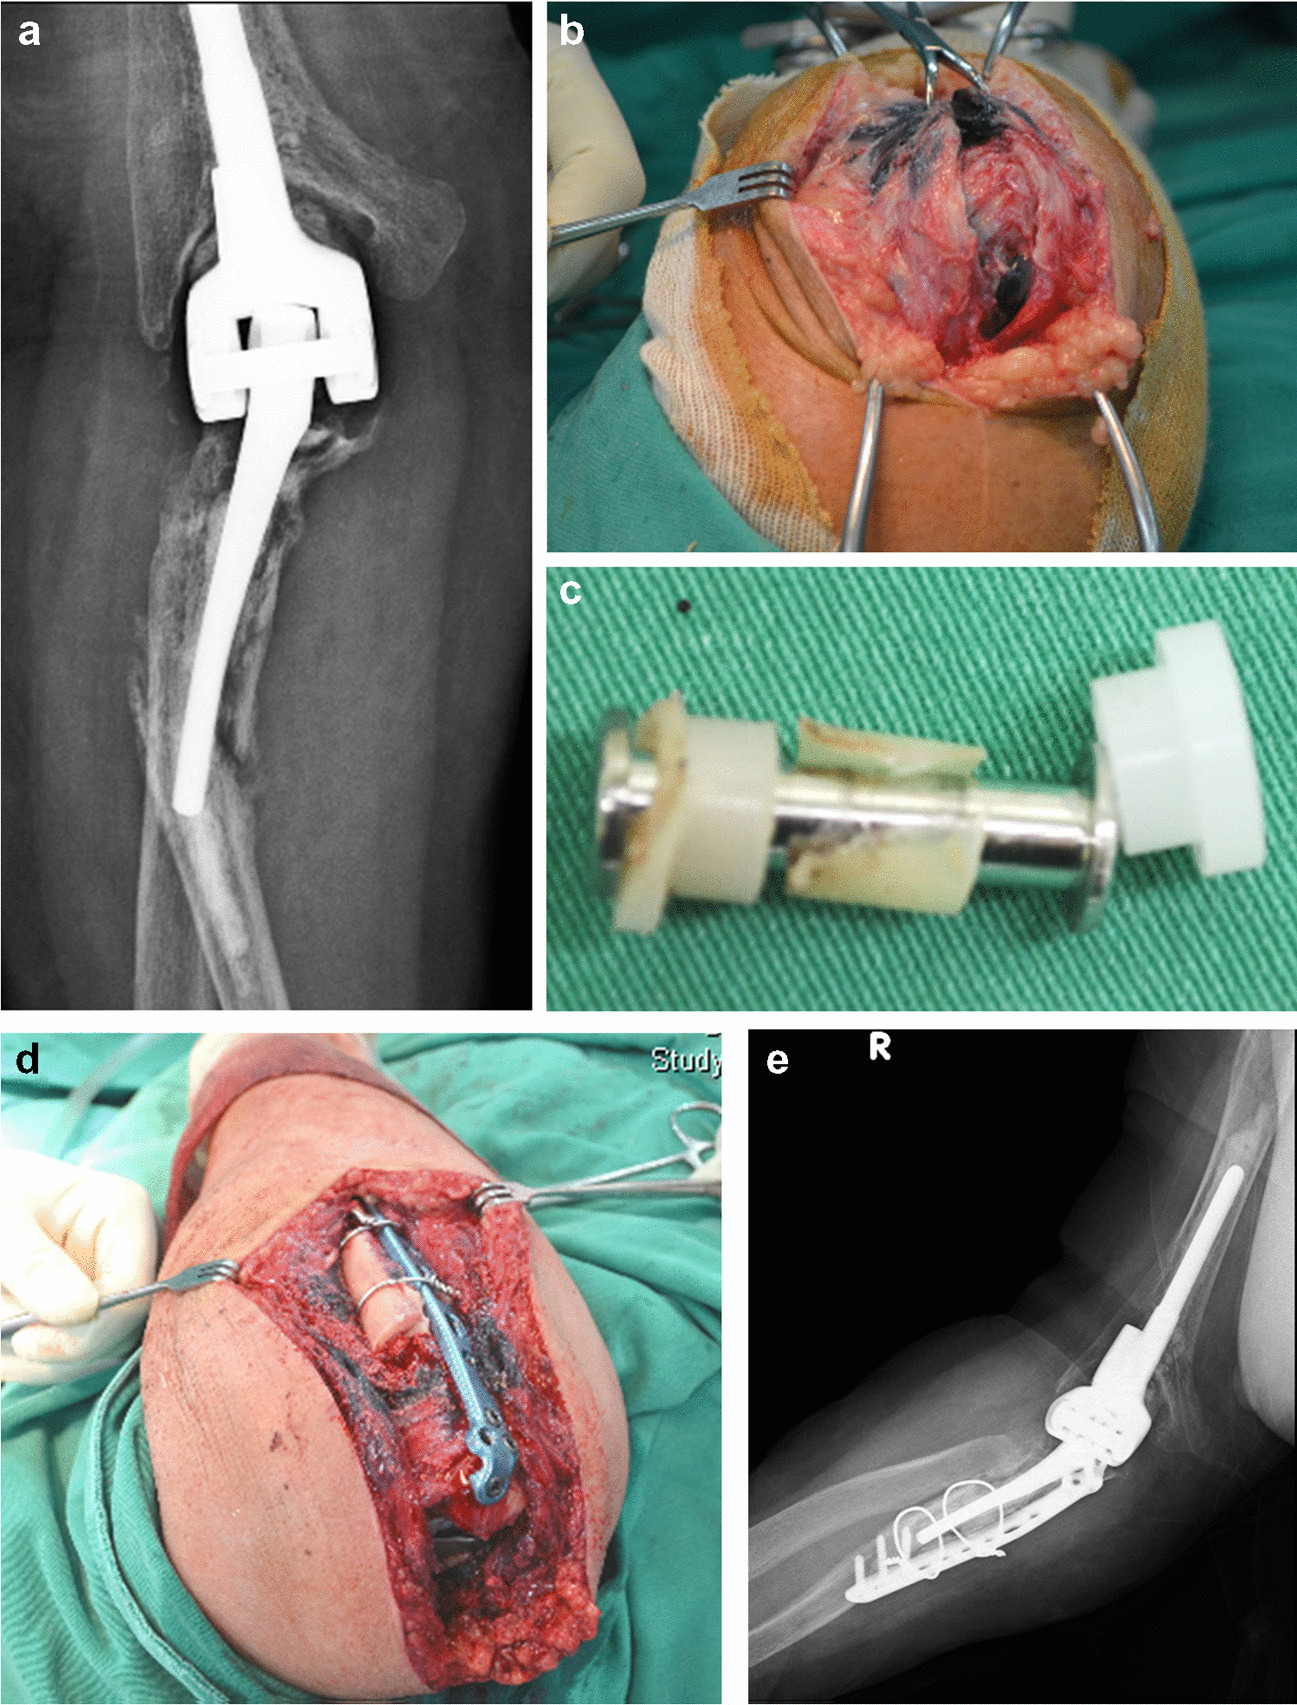 Failure of the linkage mechanism in a semi-constrained total elbow arthroplasty is a rare and unpredictable event: a review of seven cases